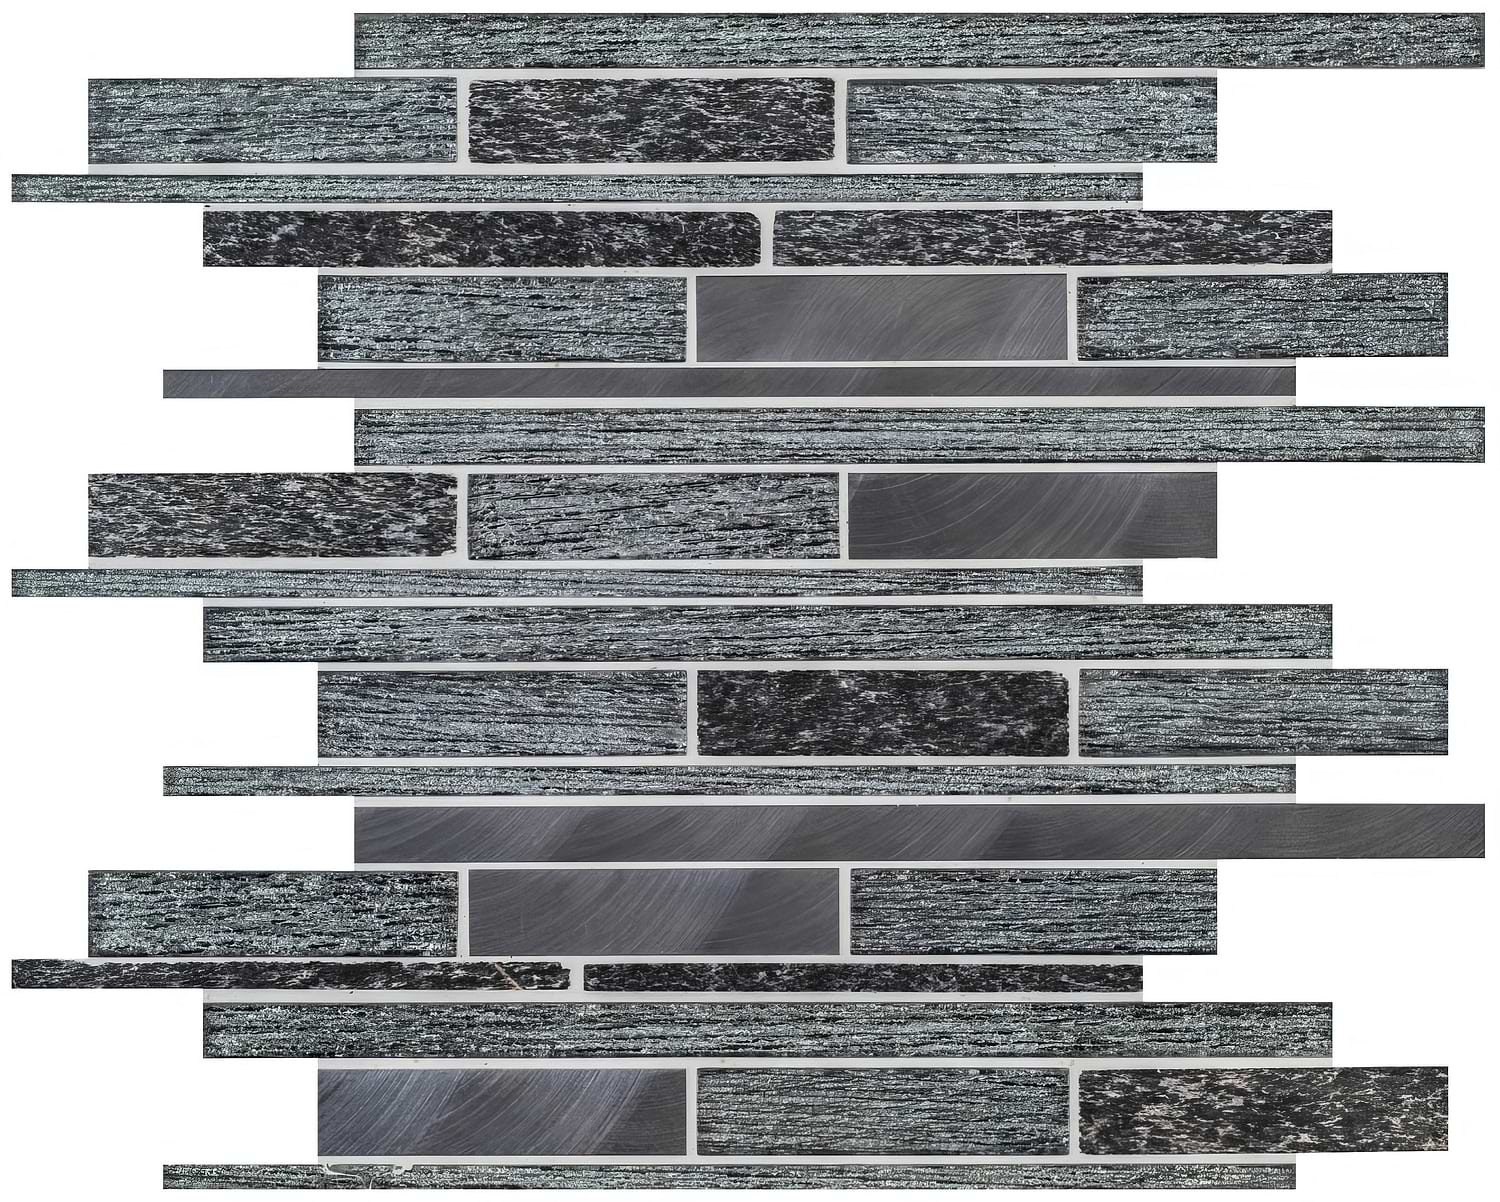 Tribune Linear Mixed Material Mosaic - Hyperion Tiles